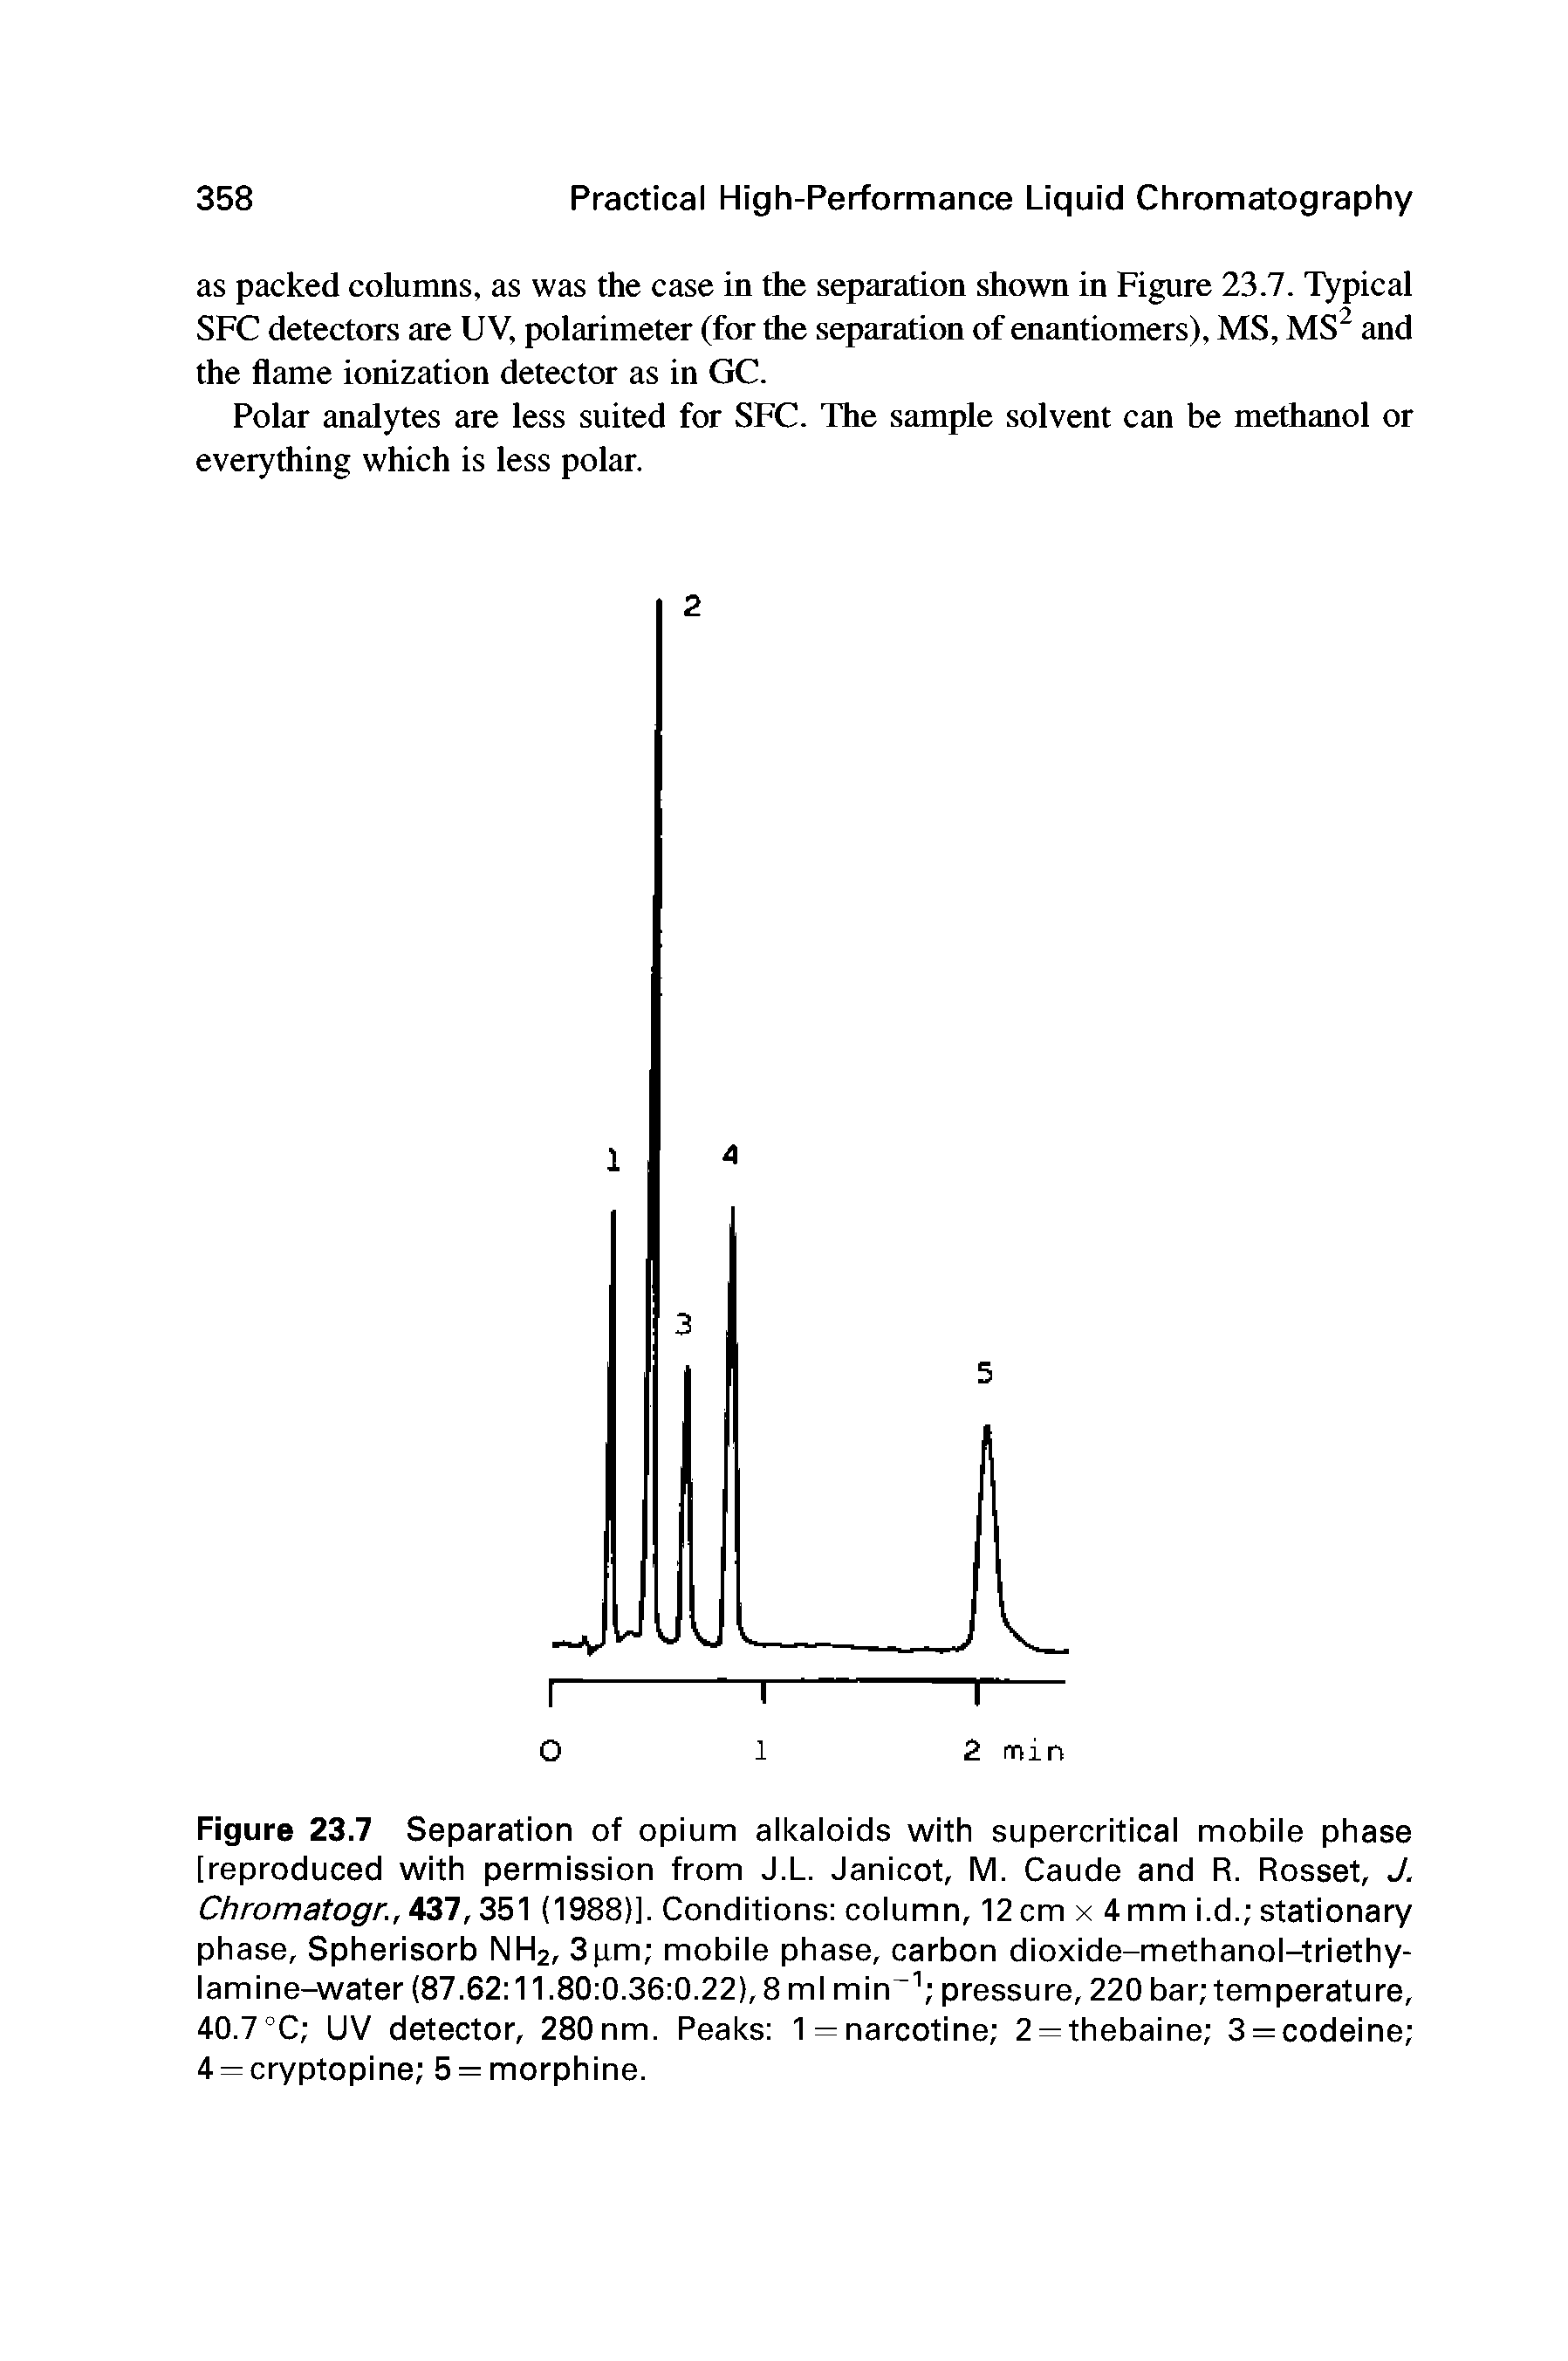 Figure 23.7 Separation of opium alkaloids with supercritical mobile phase [reproduced with permission from J.L. Janicot, M. Caude and R. Rosset, J. Chromatogr., 437,351 (1988)]. Conditions column, 12 cm x 4 mm i.d. stationary phase, Spherisorb NH2, 3pm mobile phase, carbon dioxide-methanol-triethy-lamine-water (87.62 11.80 0.36 0.22),8 ml min pressure, 220 bar temperature, 40.7 C UV detector, 280 nm. Peaks 1= narcotine 2 —thebaine 3 = codeine 4 = cryptopine 5 = morphine.